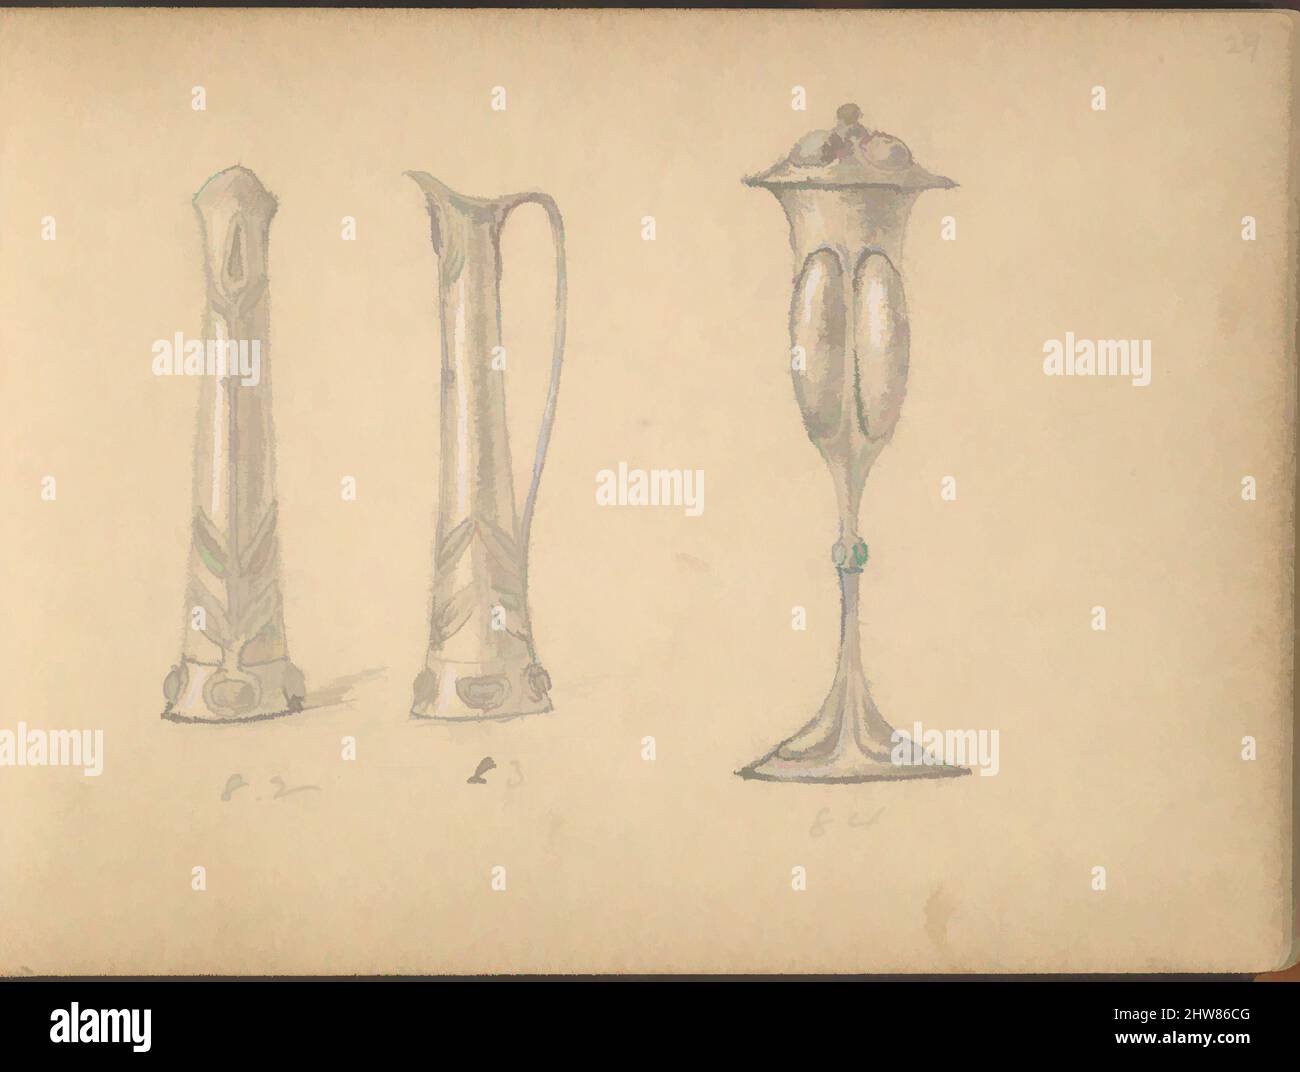 Art inspired by Designs for a Ewer and a Drinking Vessel, 1899–1900, Graphite and gouache, sheet: 3 1/2 x 5 in. (8.9 x 12.7 cm), Edgar Gilstrap Simpson (British, 1867–1945 (presumed)), Page with two designs. On the left an elegant high ewer is portrayed from the front and side. On the, Classic works modernized by Artotop with a splash of modernity. Shapes, color and value, eye-catching visual impact on art. Emotions through freedom of artworks in a contemporary way. A timeless message pursuing a wildly creative new direction. Artists turning to the digital medium and creating the Artotop NFT Stock Photo